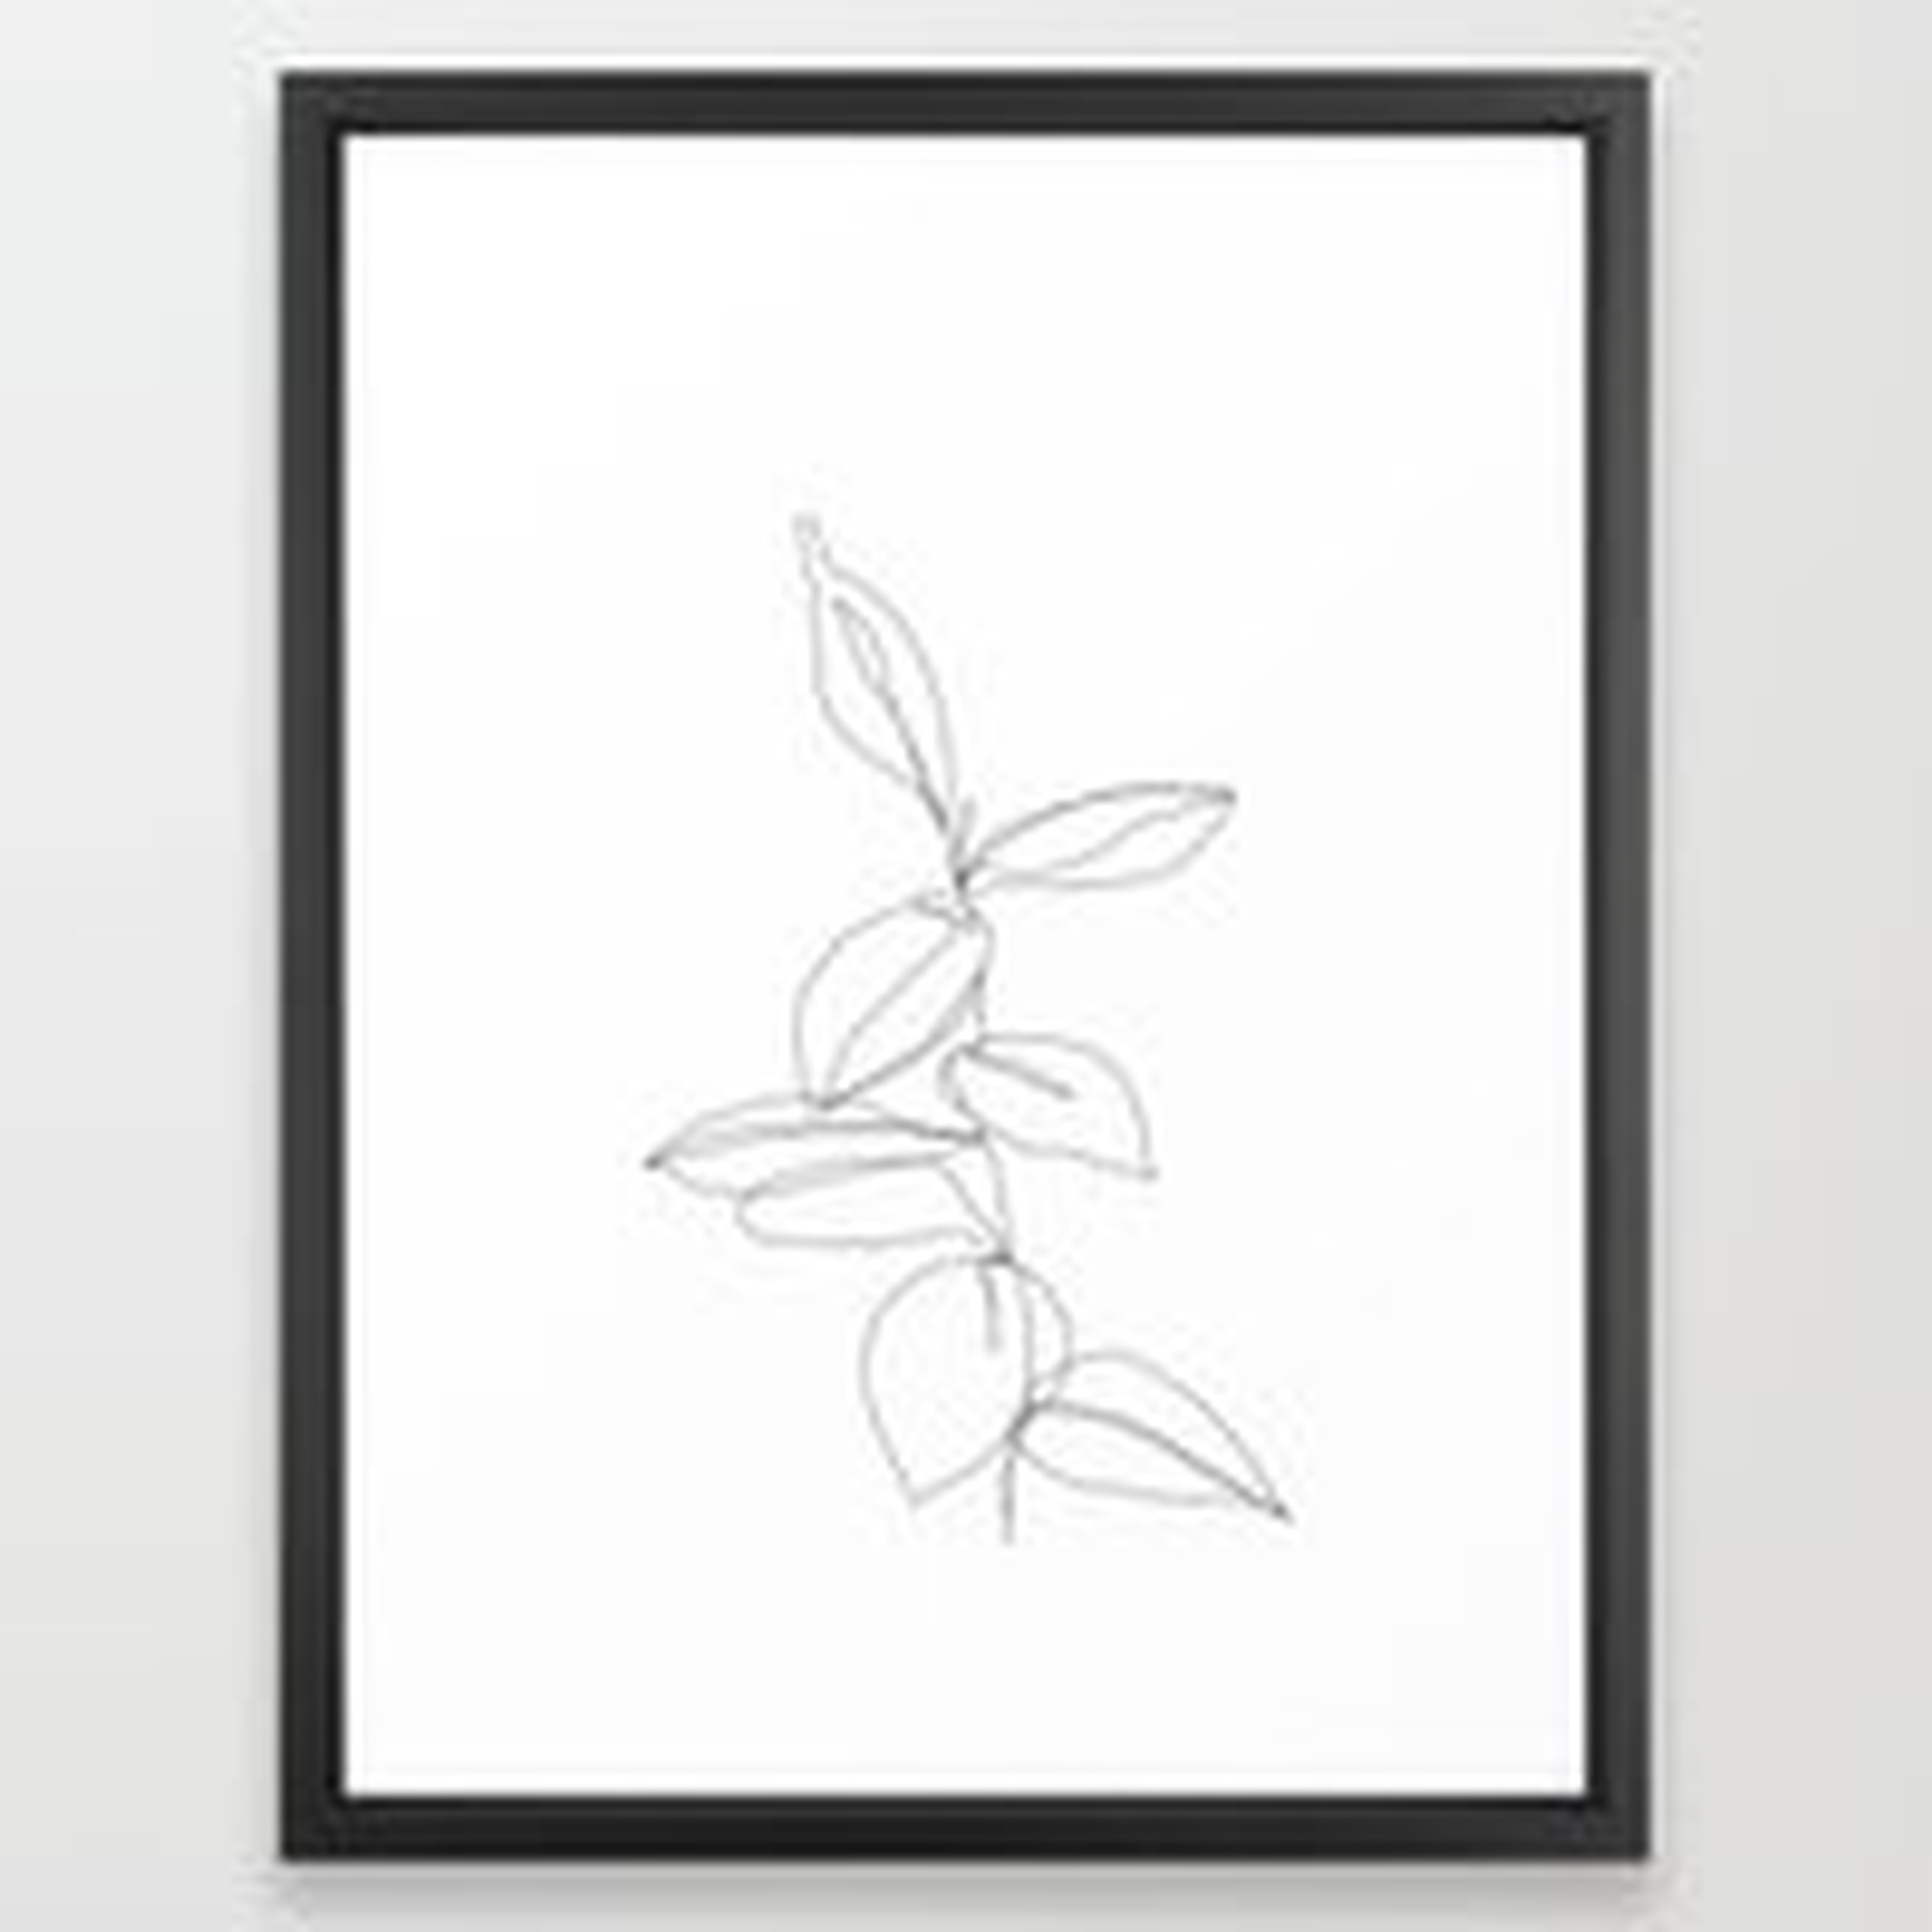 One line minimal plant leaves drawing - Berry Framed Art Print - Society6